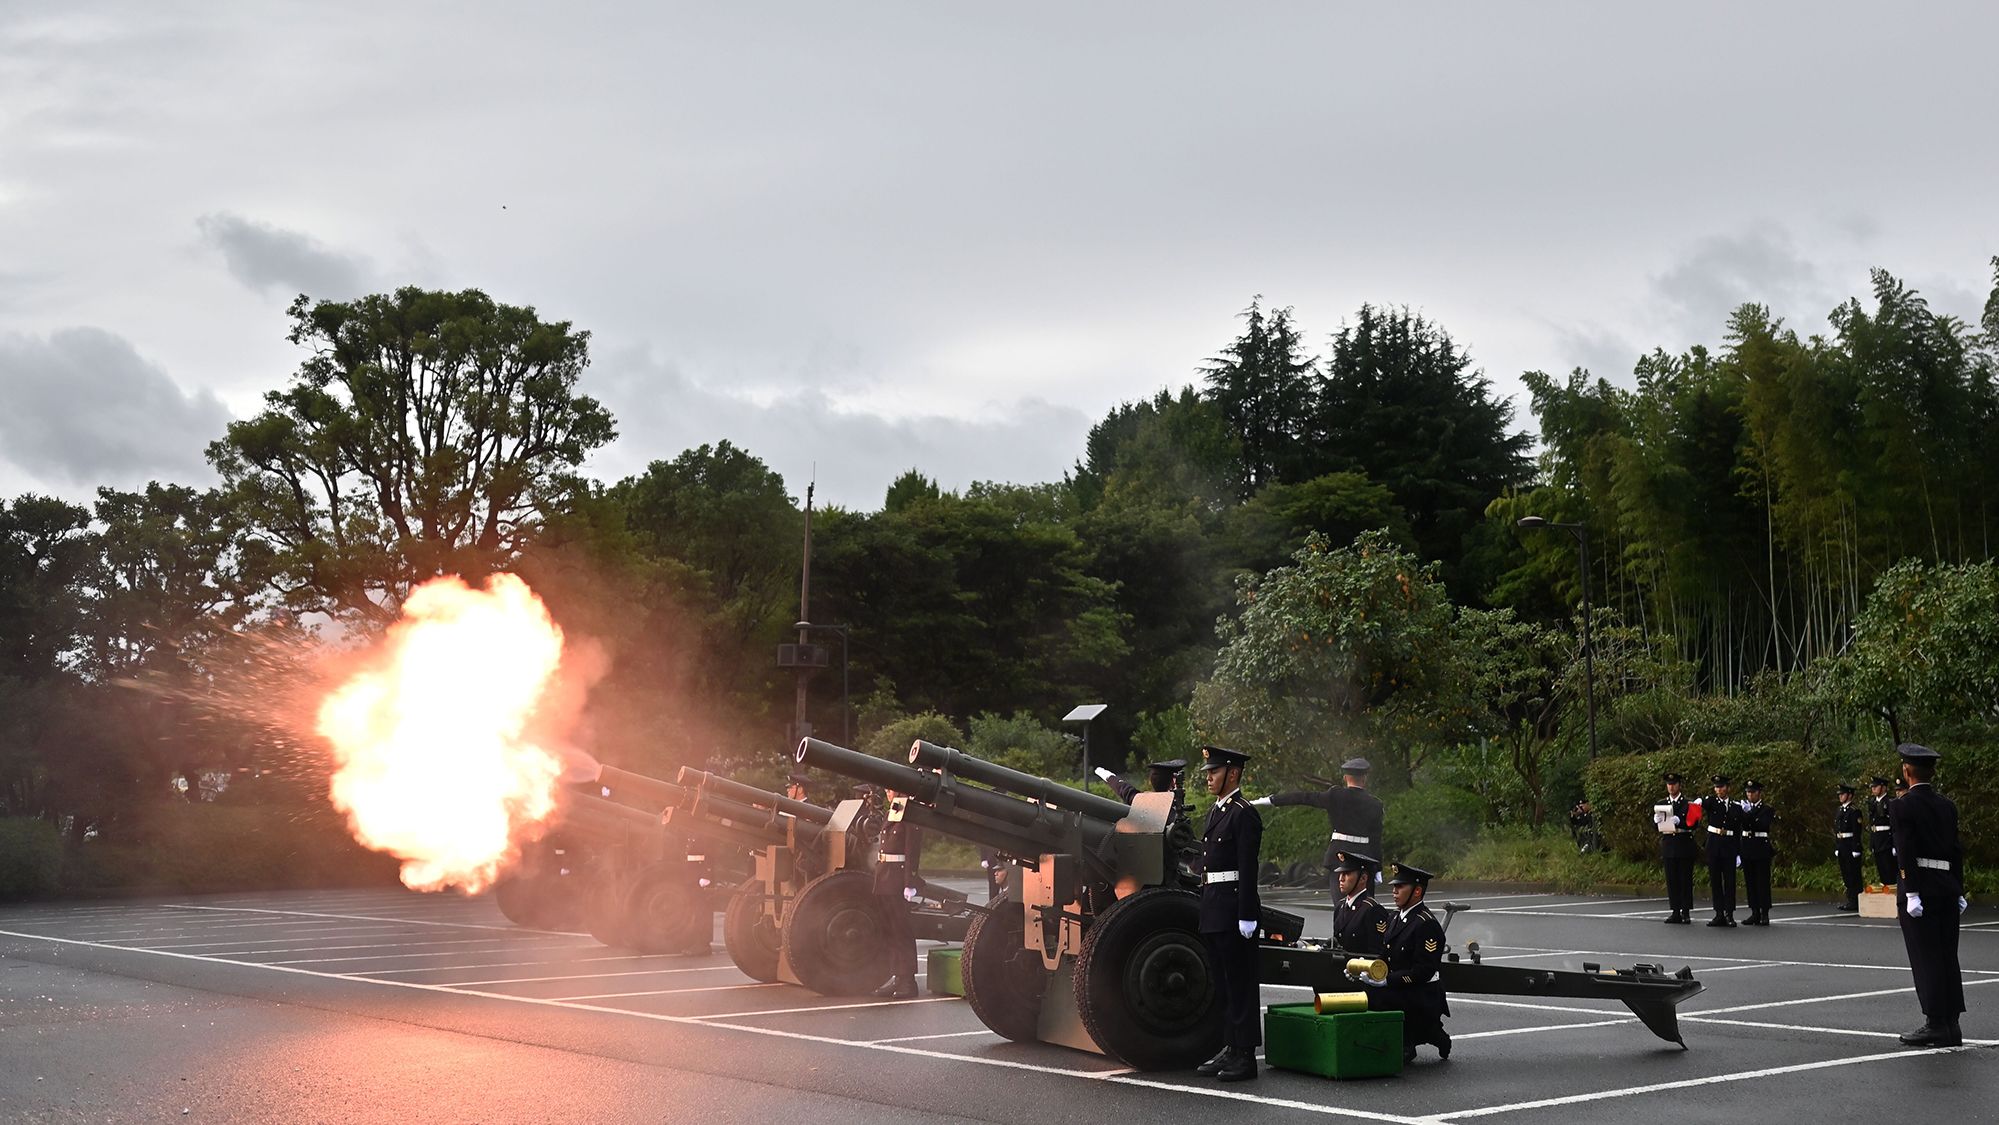 Japan Self-Defense Forces fire artilleries to mark the proclamation of Japan's Emperor Naruhito's ascension to the throne at a park in Tokyo.